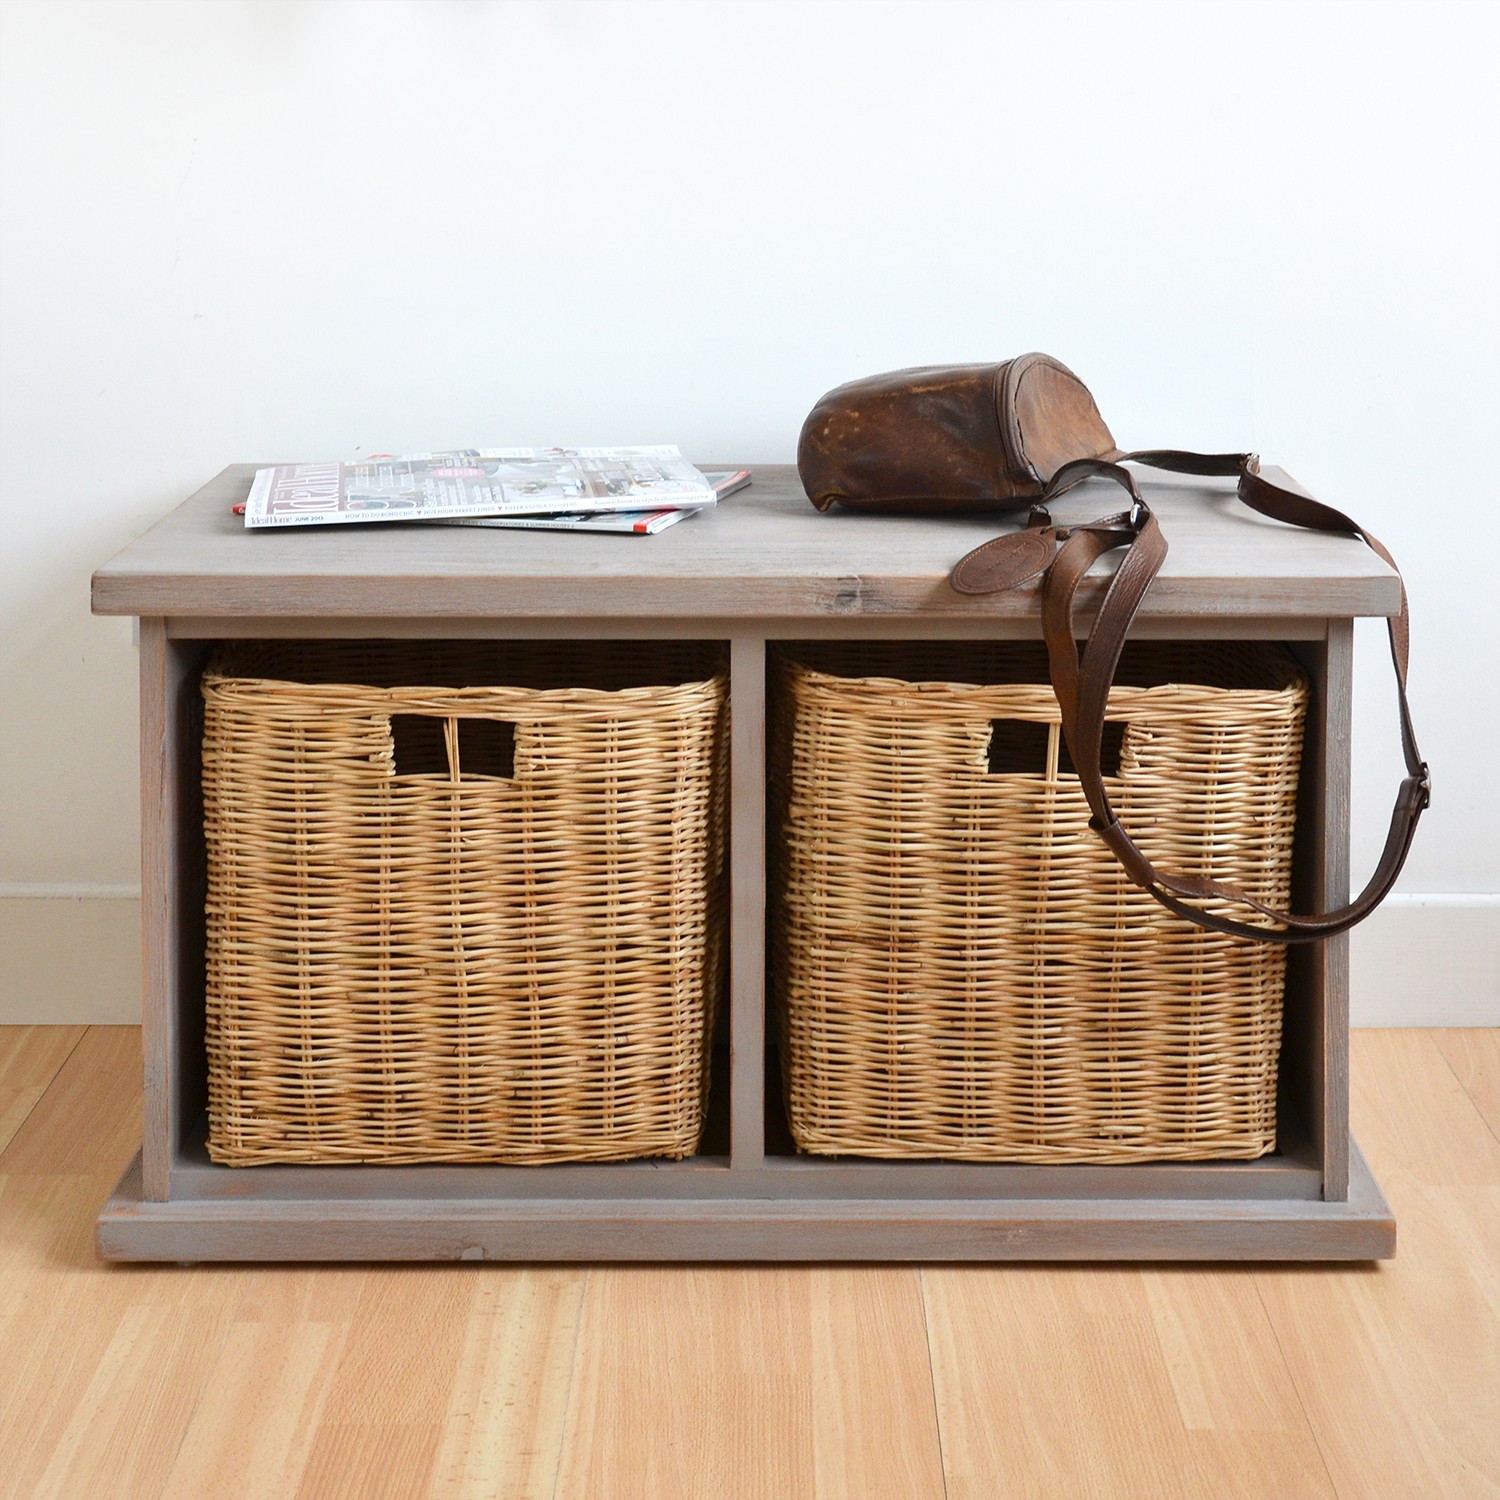 Storage Bench With Baskets
 Small Bench with Storage for Entryway Storage and Stylish